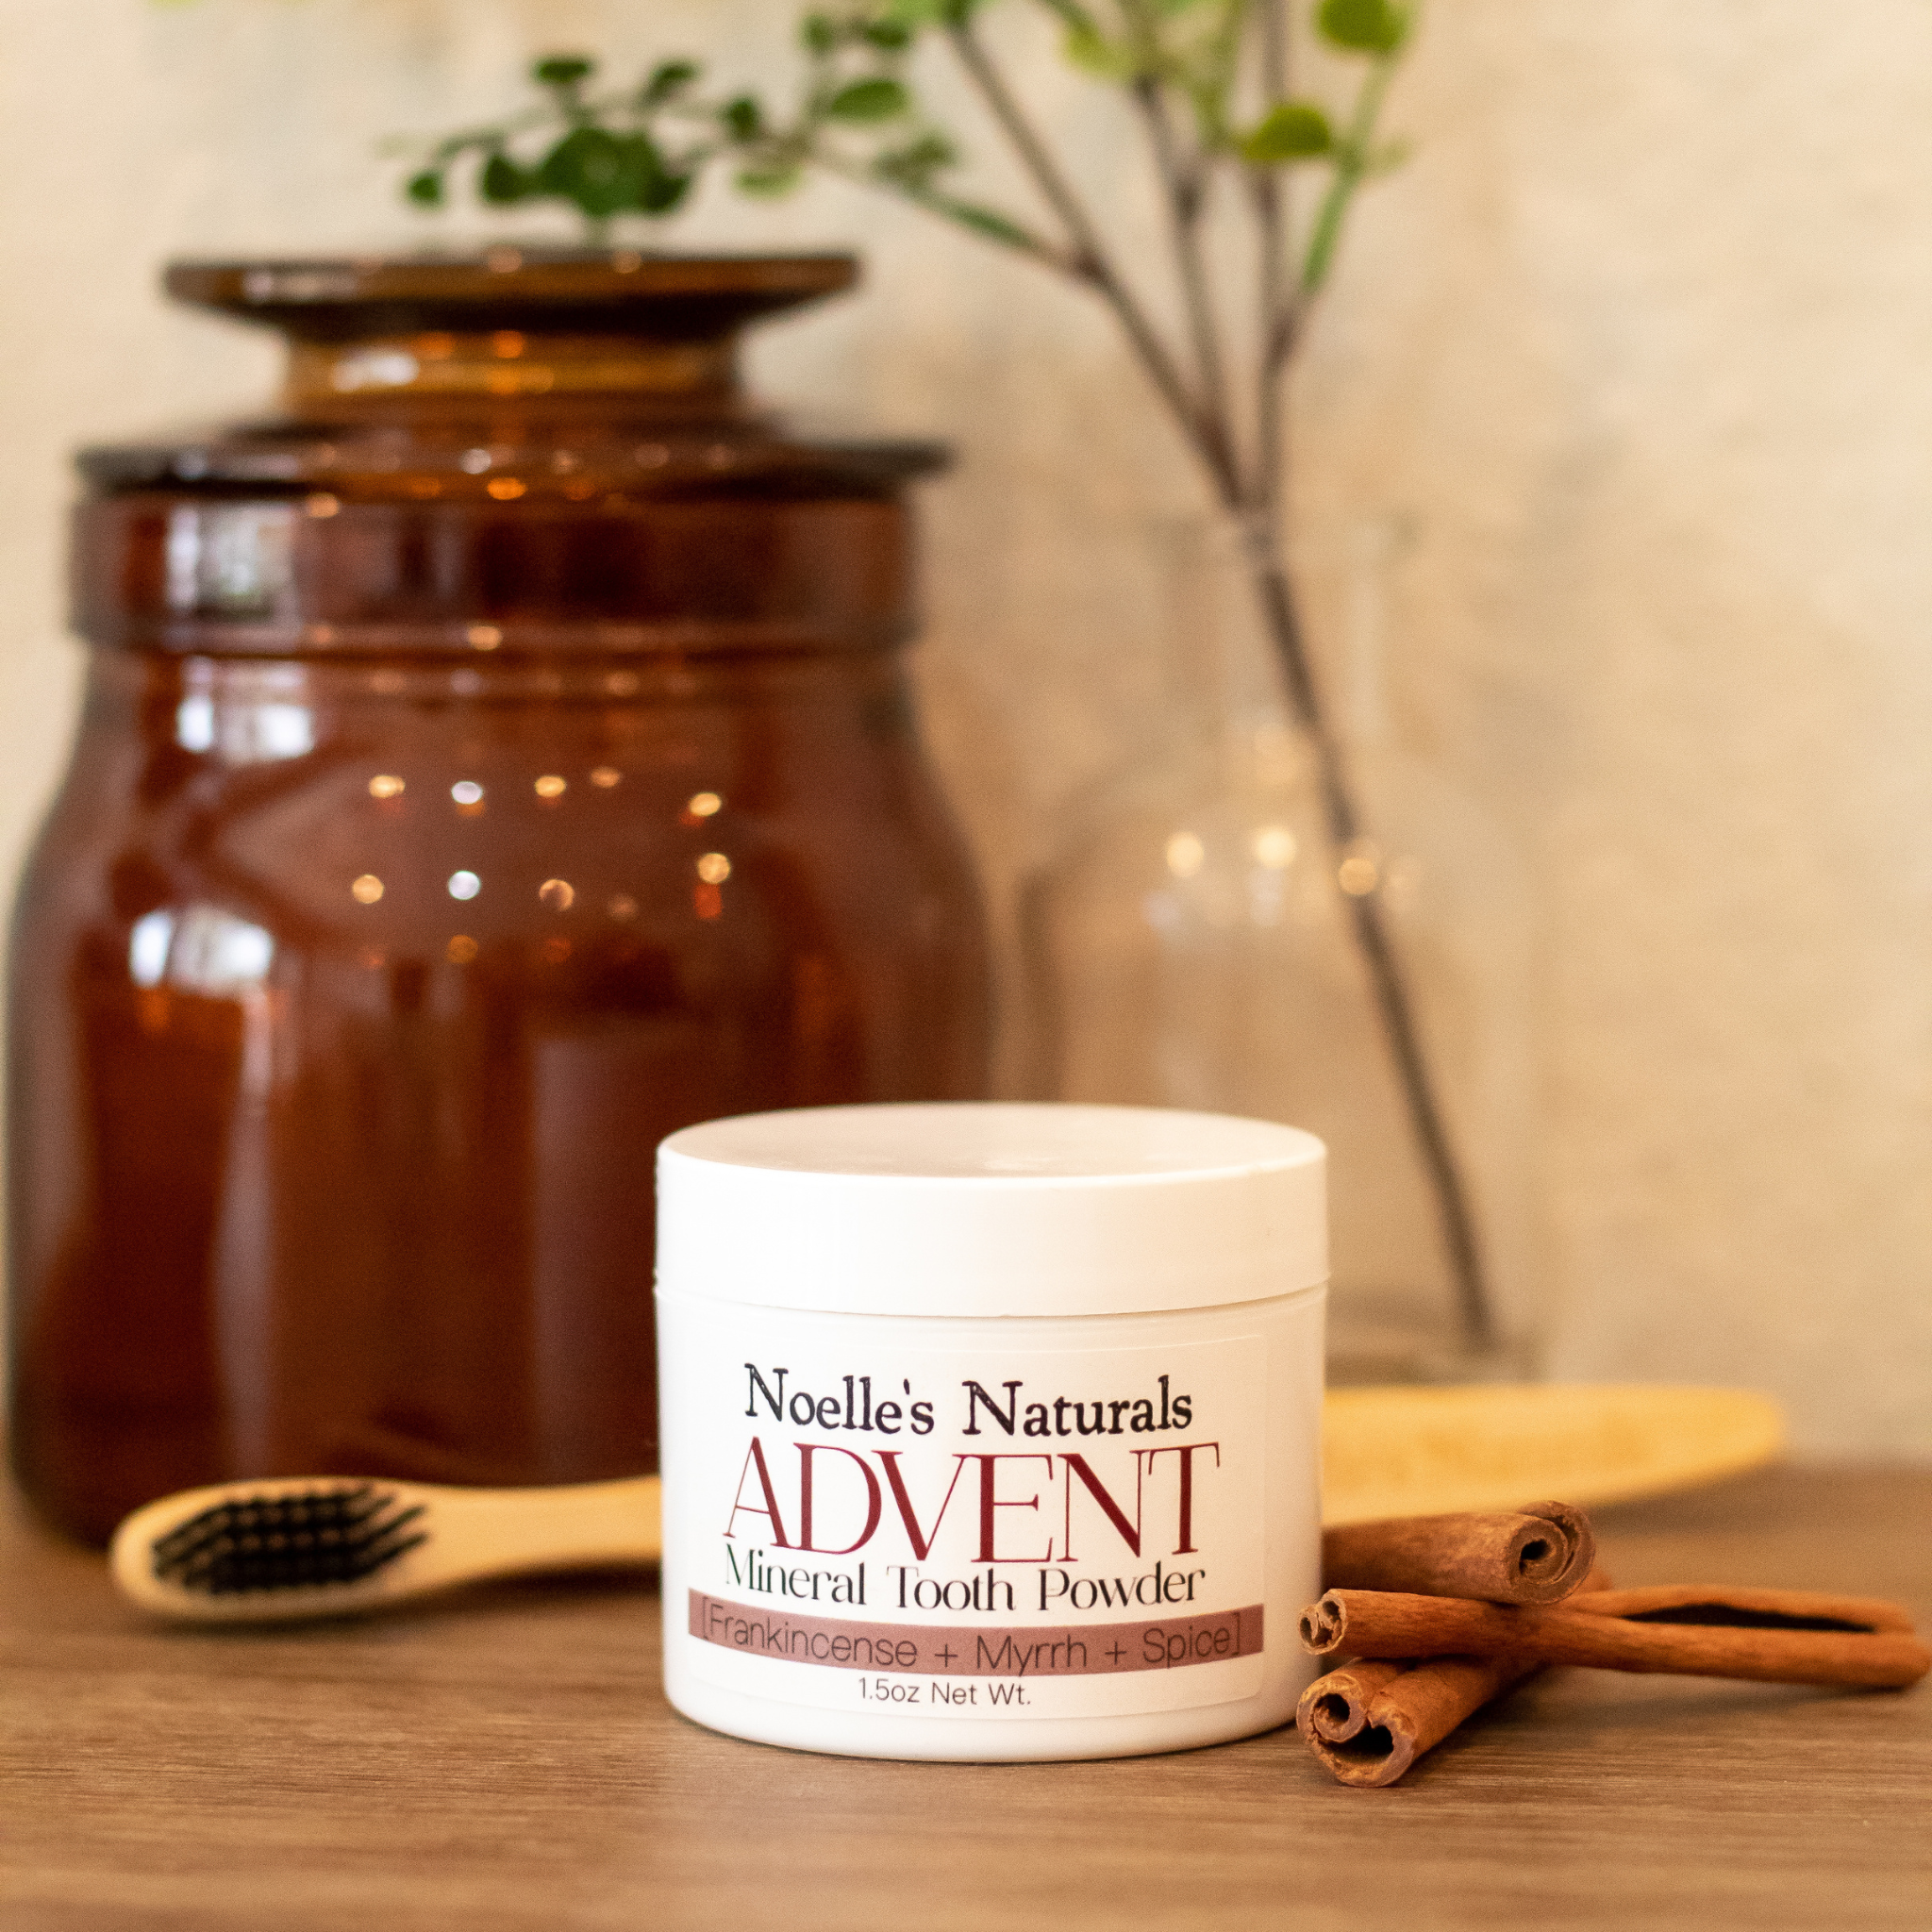 Try Noelle's Naturals Spiced Mineral Tooth Powder, Advent, for a warm and invigorating sensation! Our all natural ingredients are rich in natural occurring minerals to help strengthen your teeth!